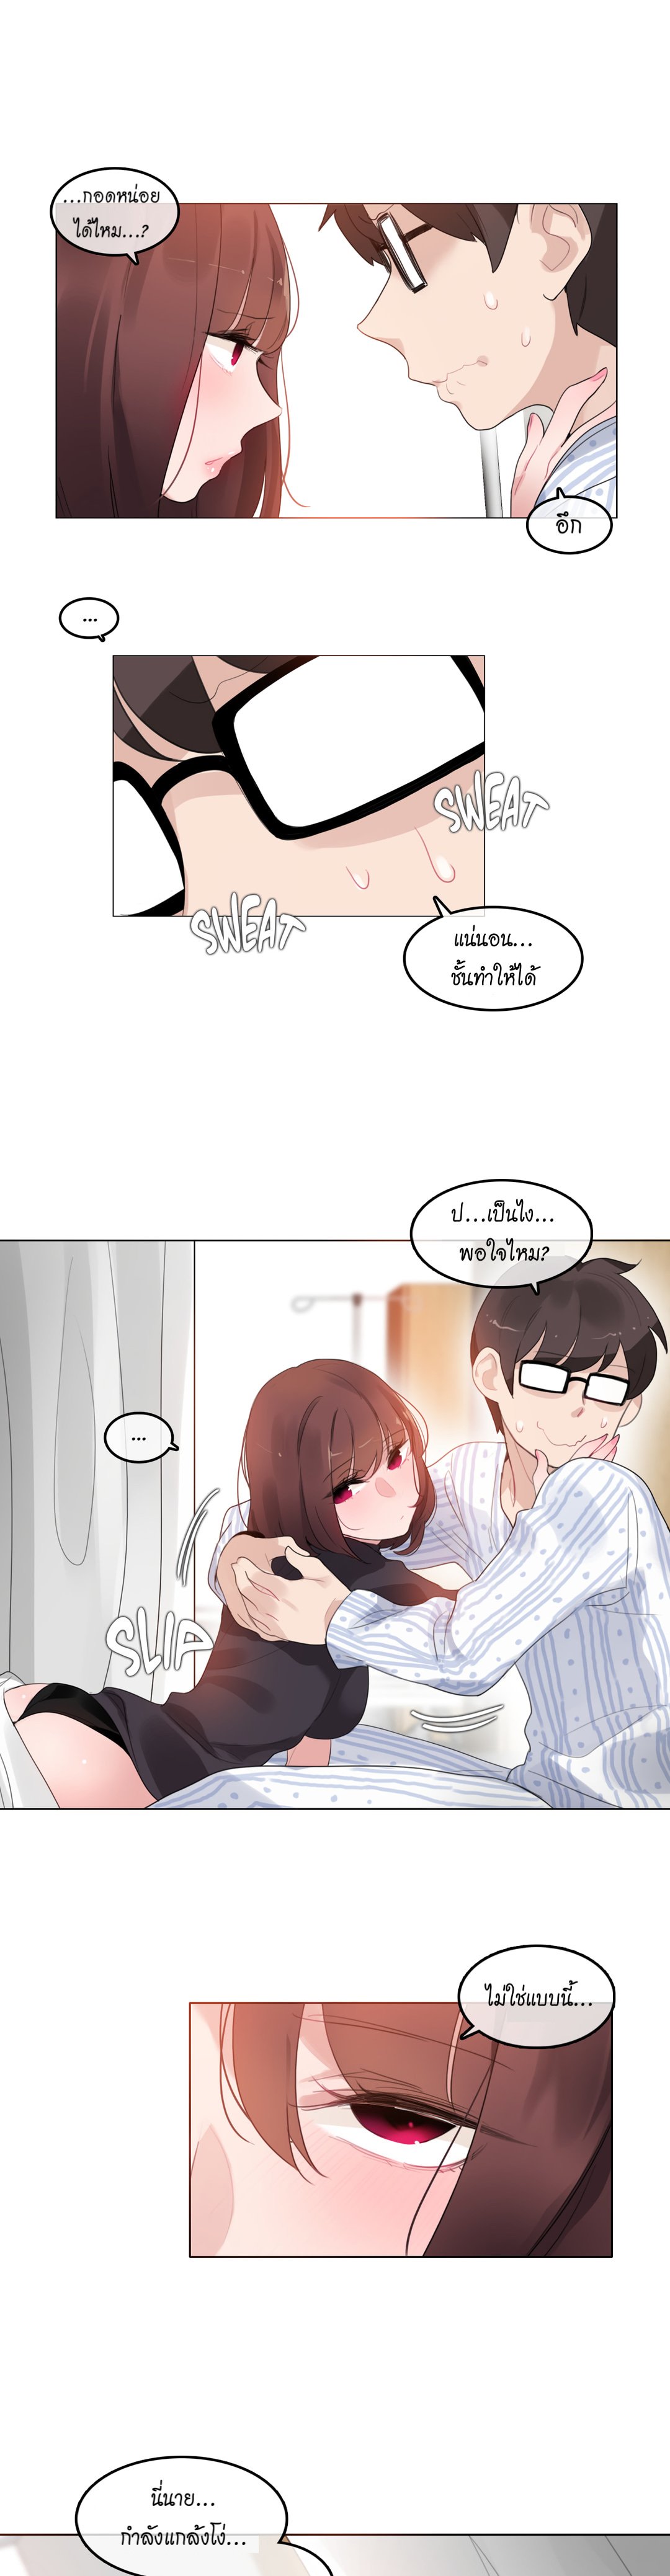 A Pervert’s Daily Life 50 13